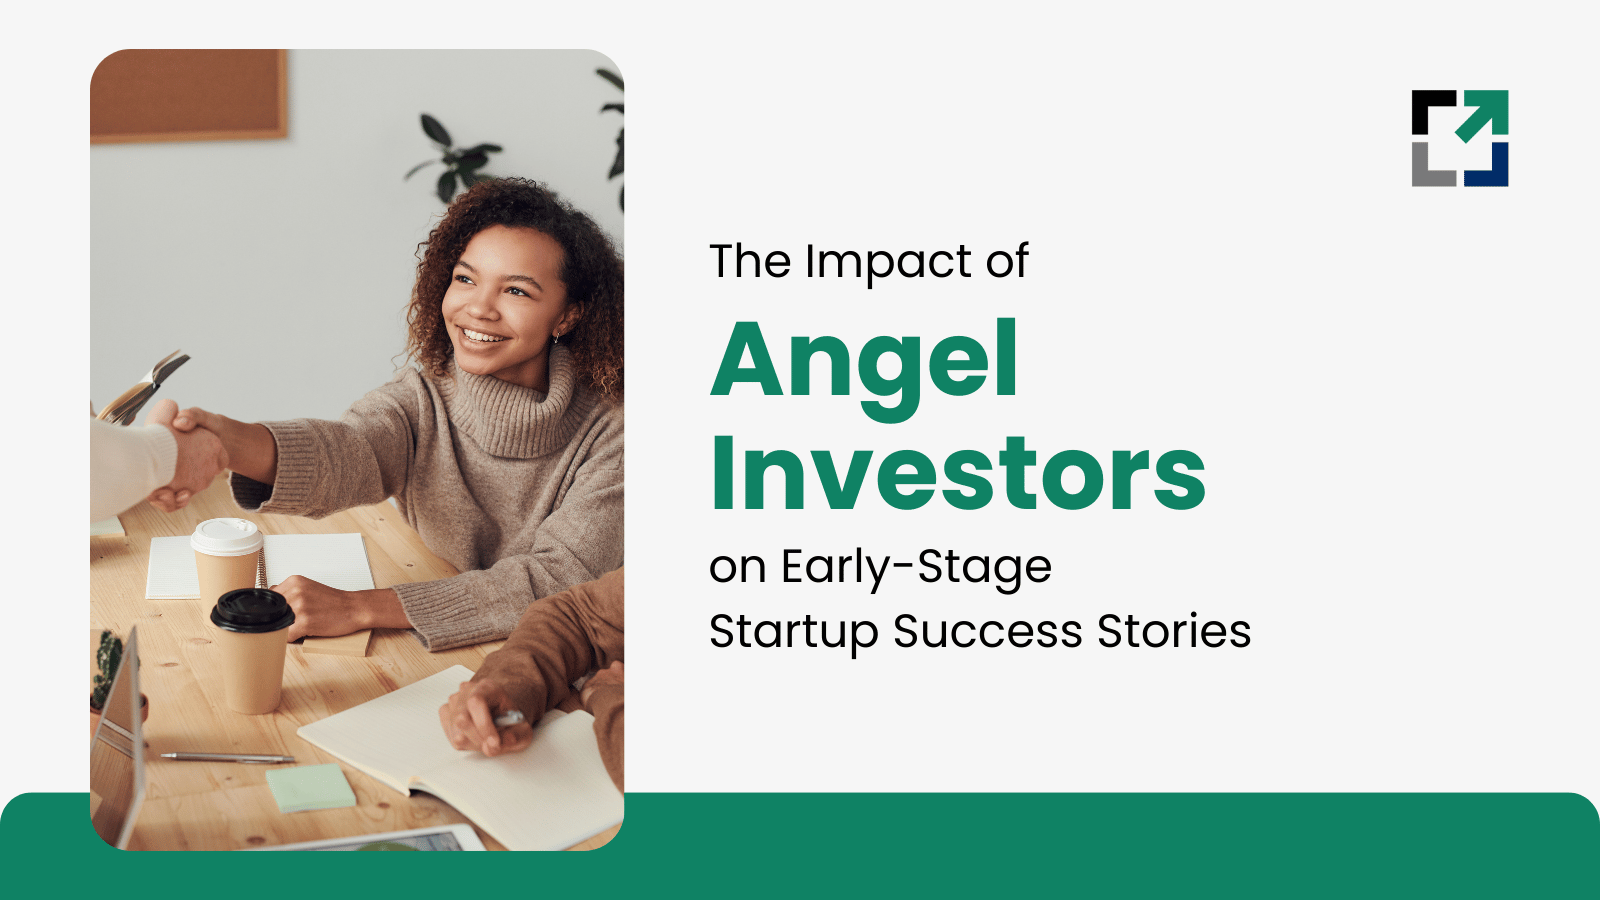 The Impact of Angel Investors on Early-Stage Startup Success Stories